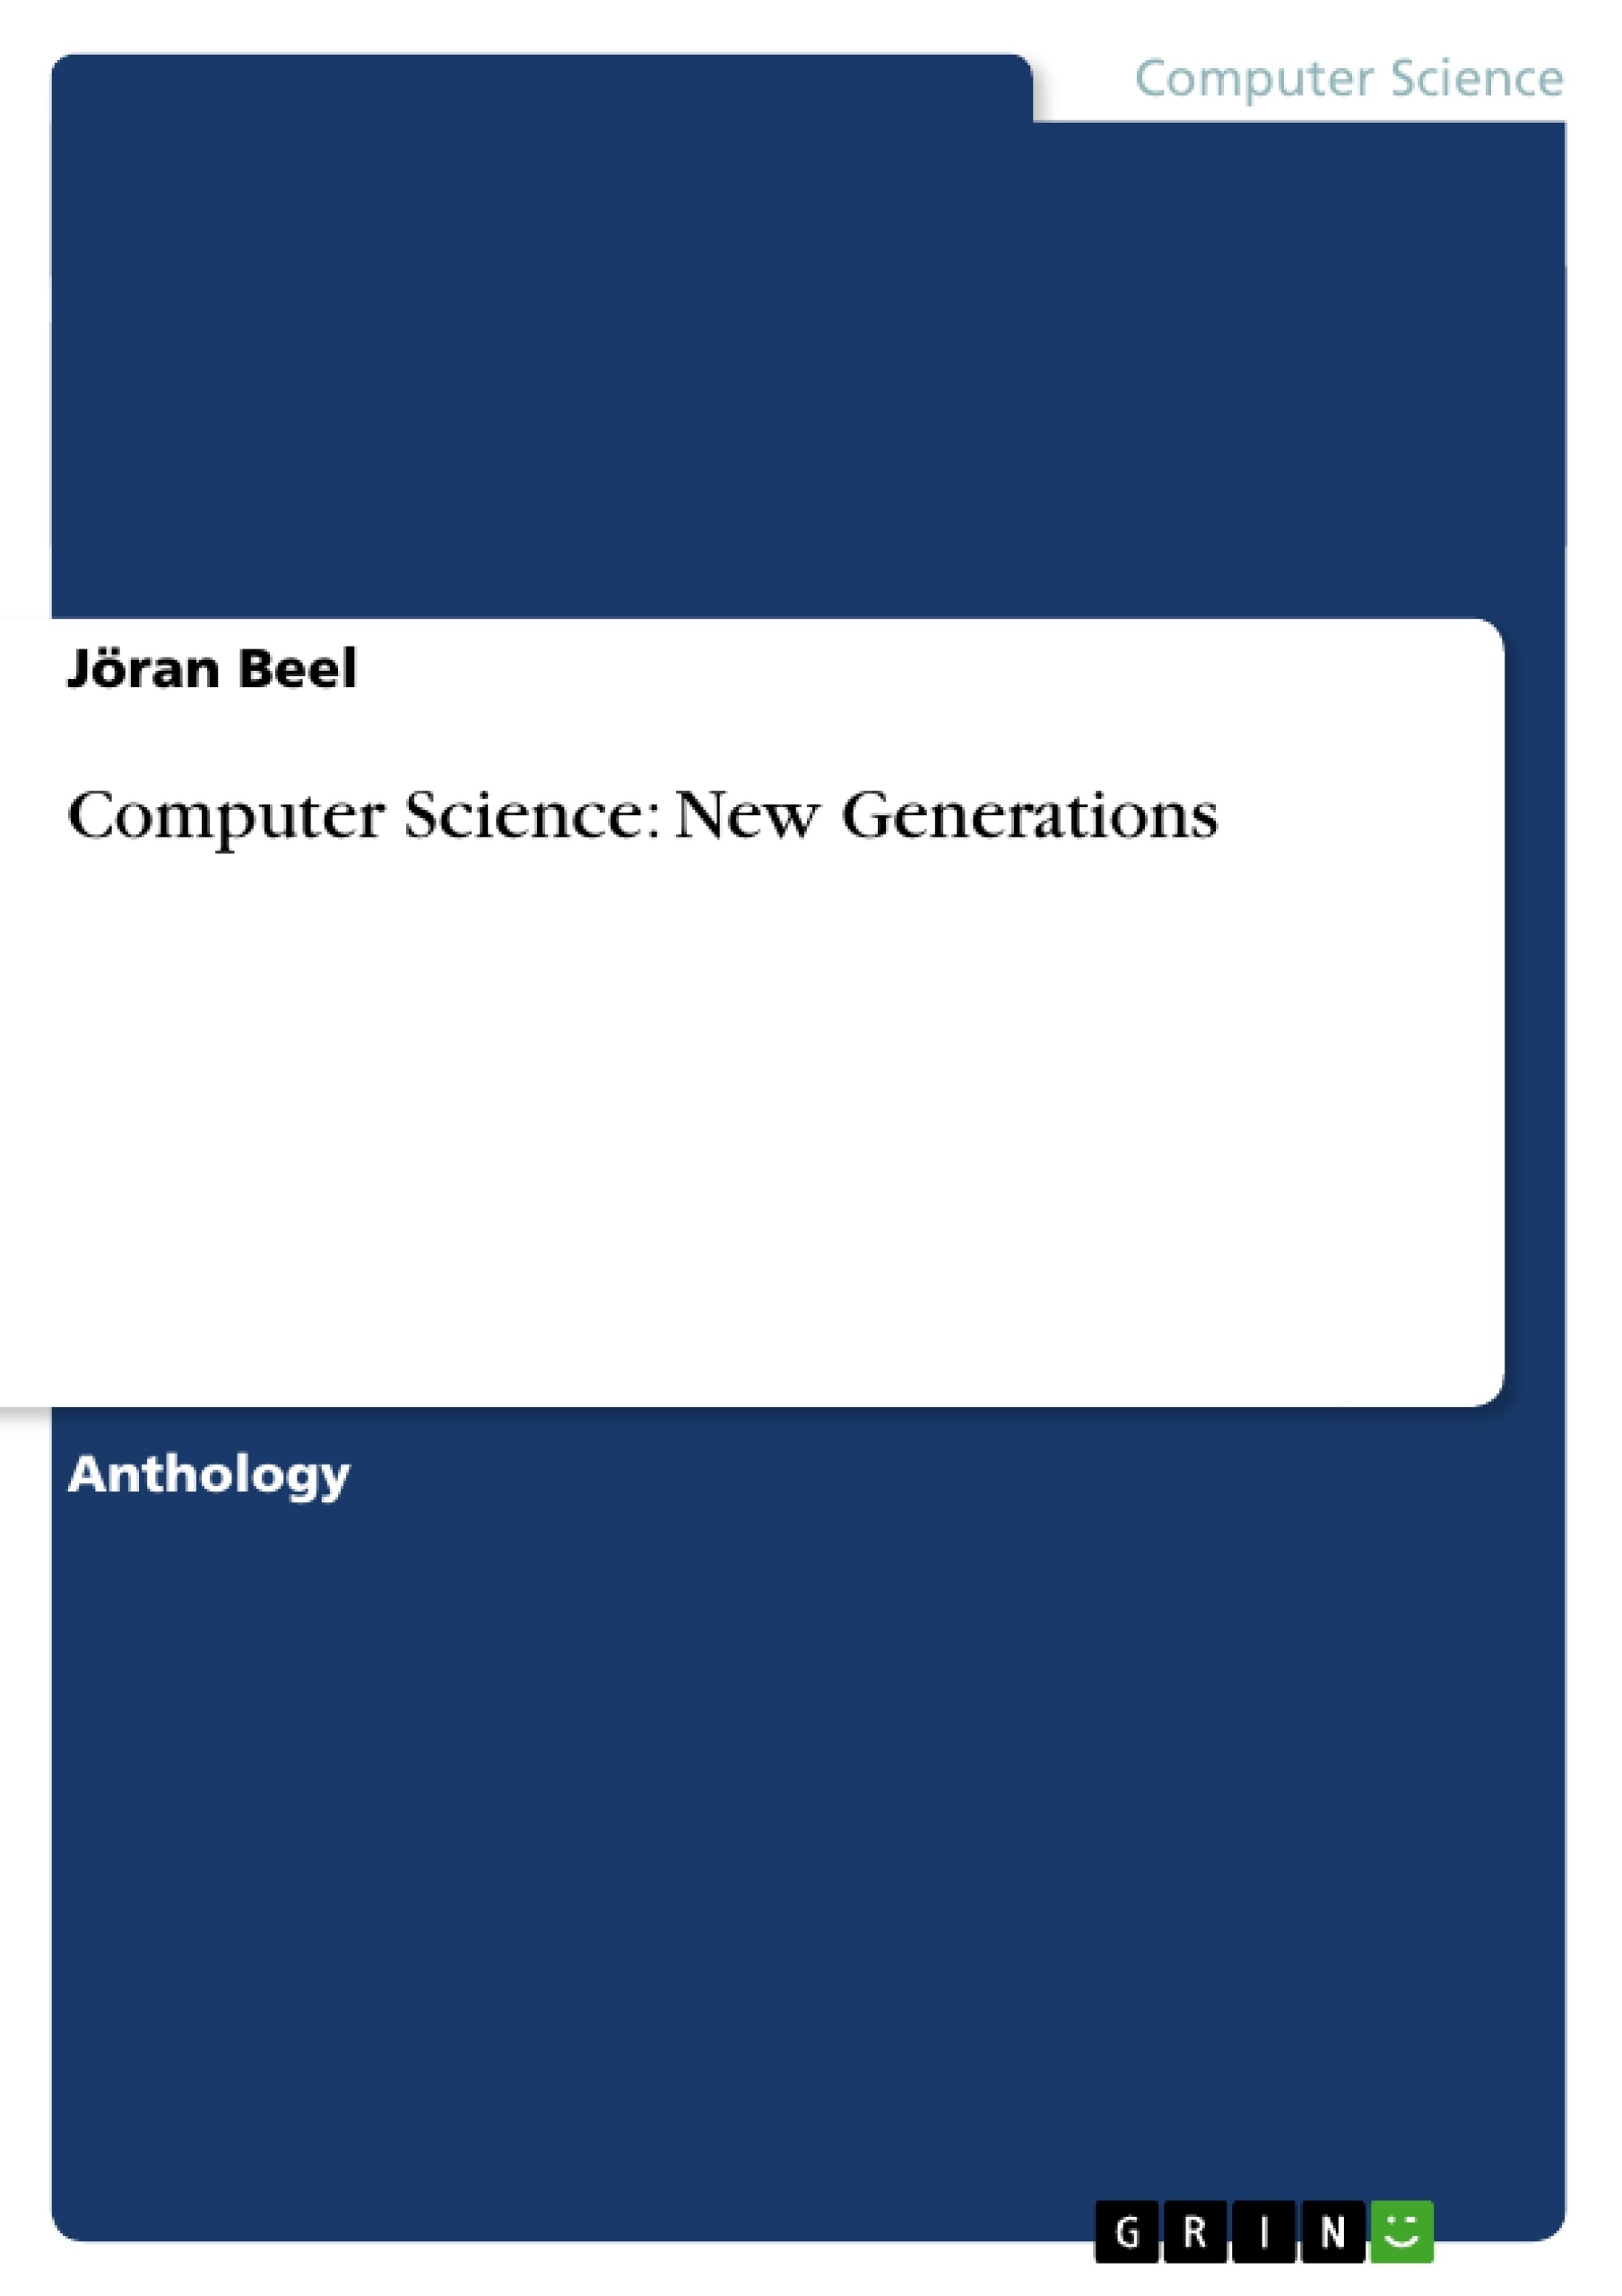 Title: Computer Science: New Generations